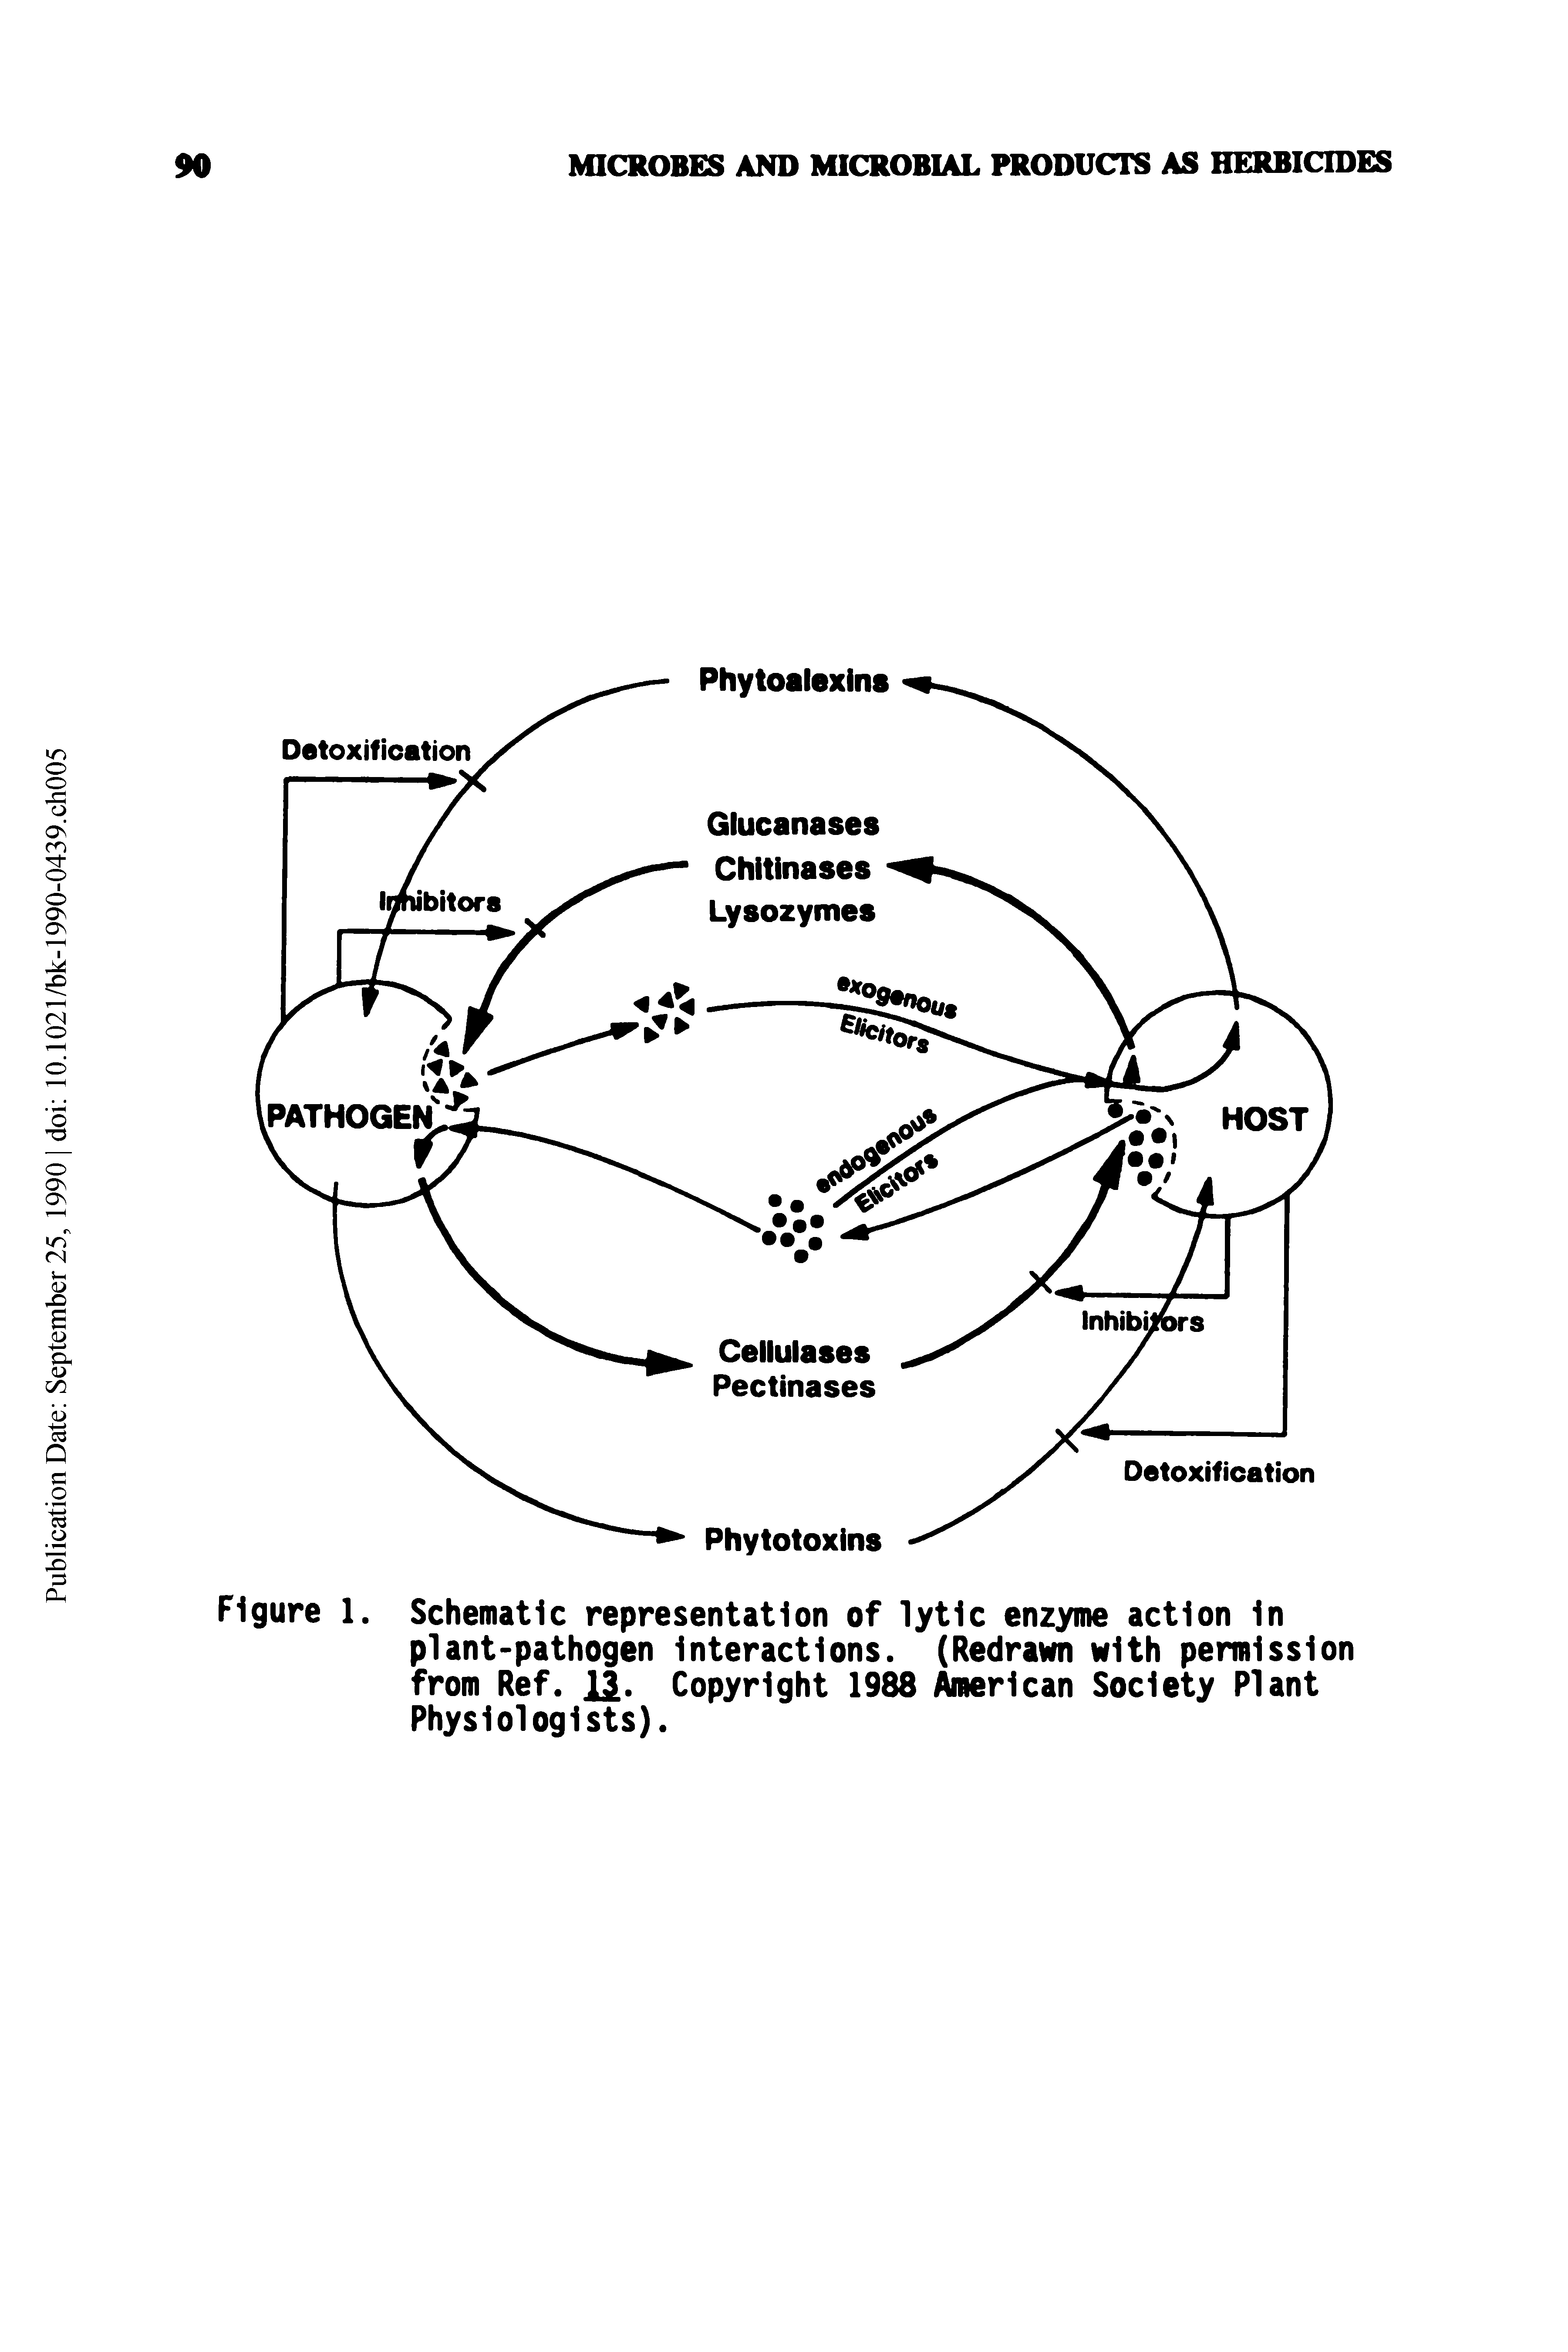 Schematic representation of lytic enzyme action In plant-pathogen Interactions. (Redrawn with permission from Ref. il. Copyright 1988 American Society Plant Physiologists).